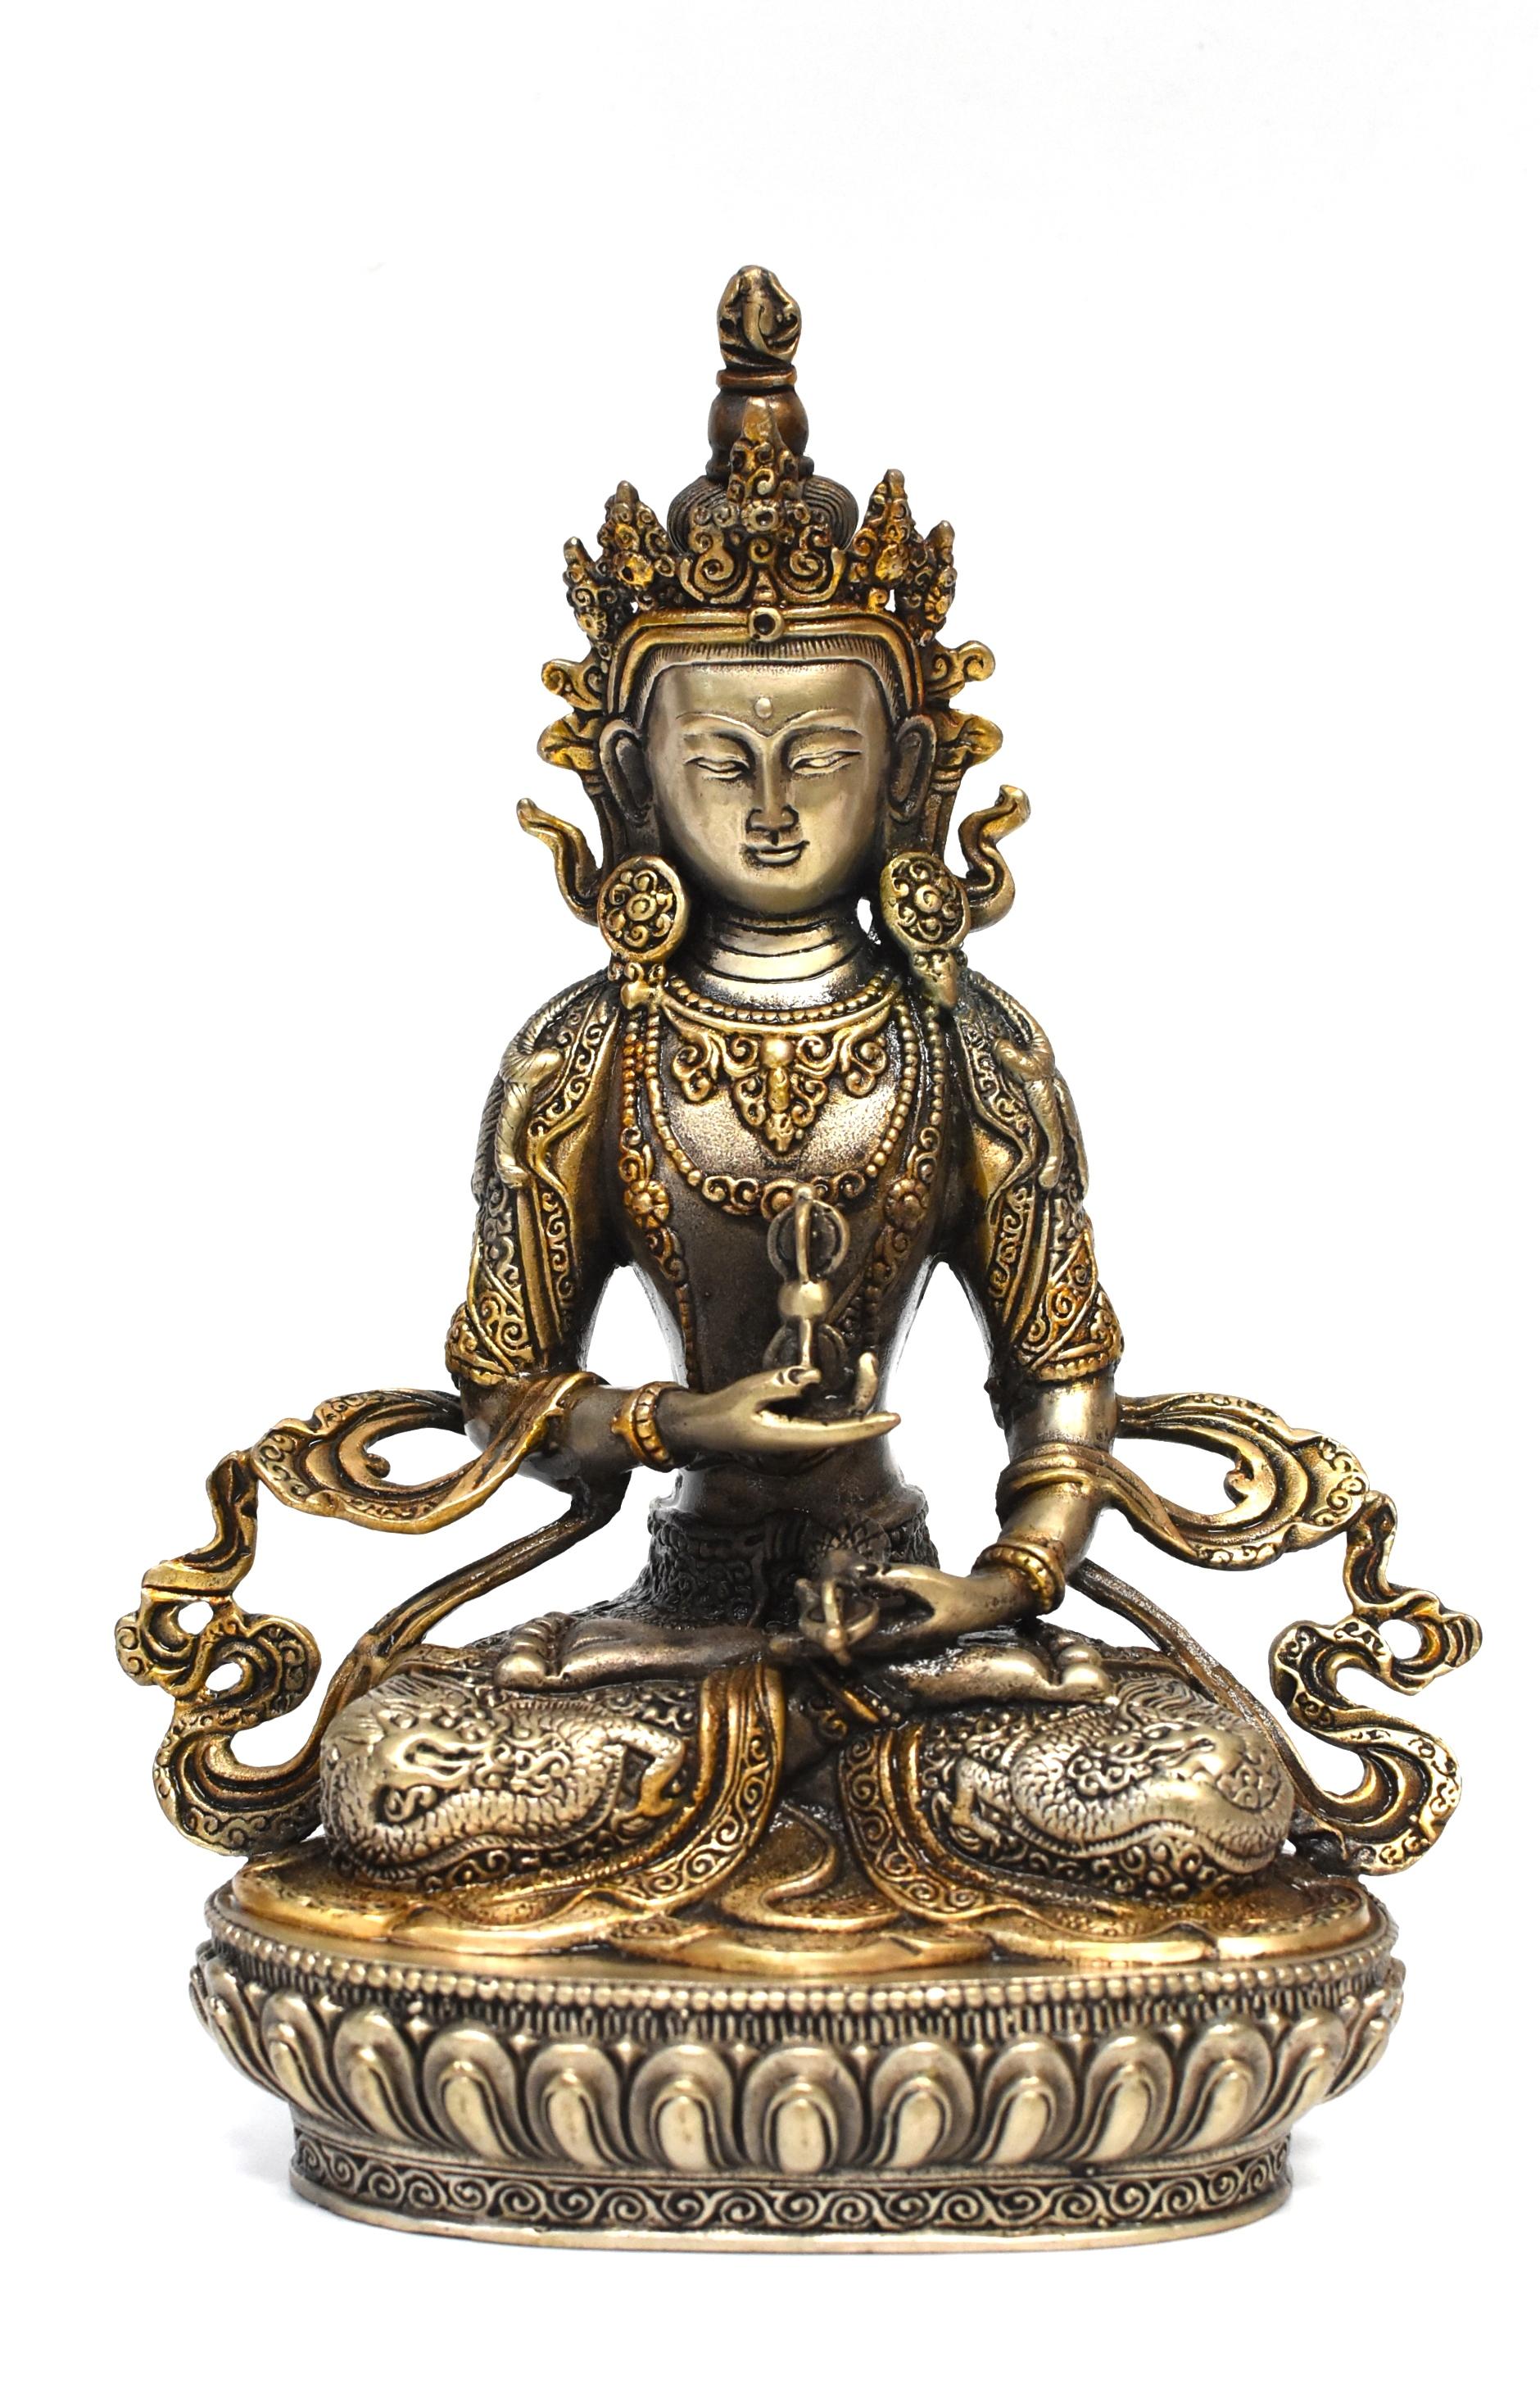 A beautiful statue of Tibetan Bodhisattva Vajrassatva in silver and gold finish. The Vajrassatva is an deity that focuses on purification of bad karma.  Meditation upon Vajrassatva is integral to enlightenment as it manifests in one's compassion for